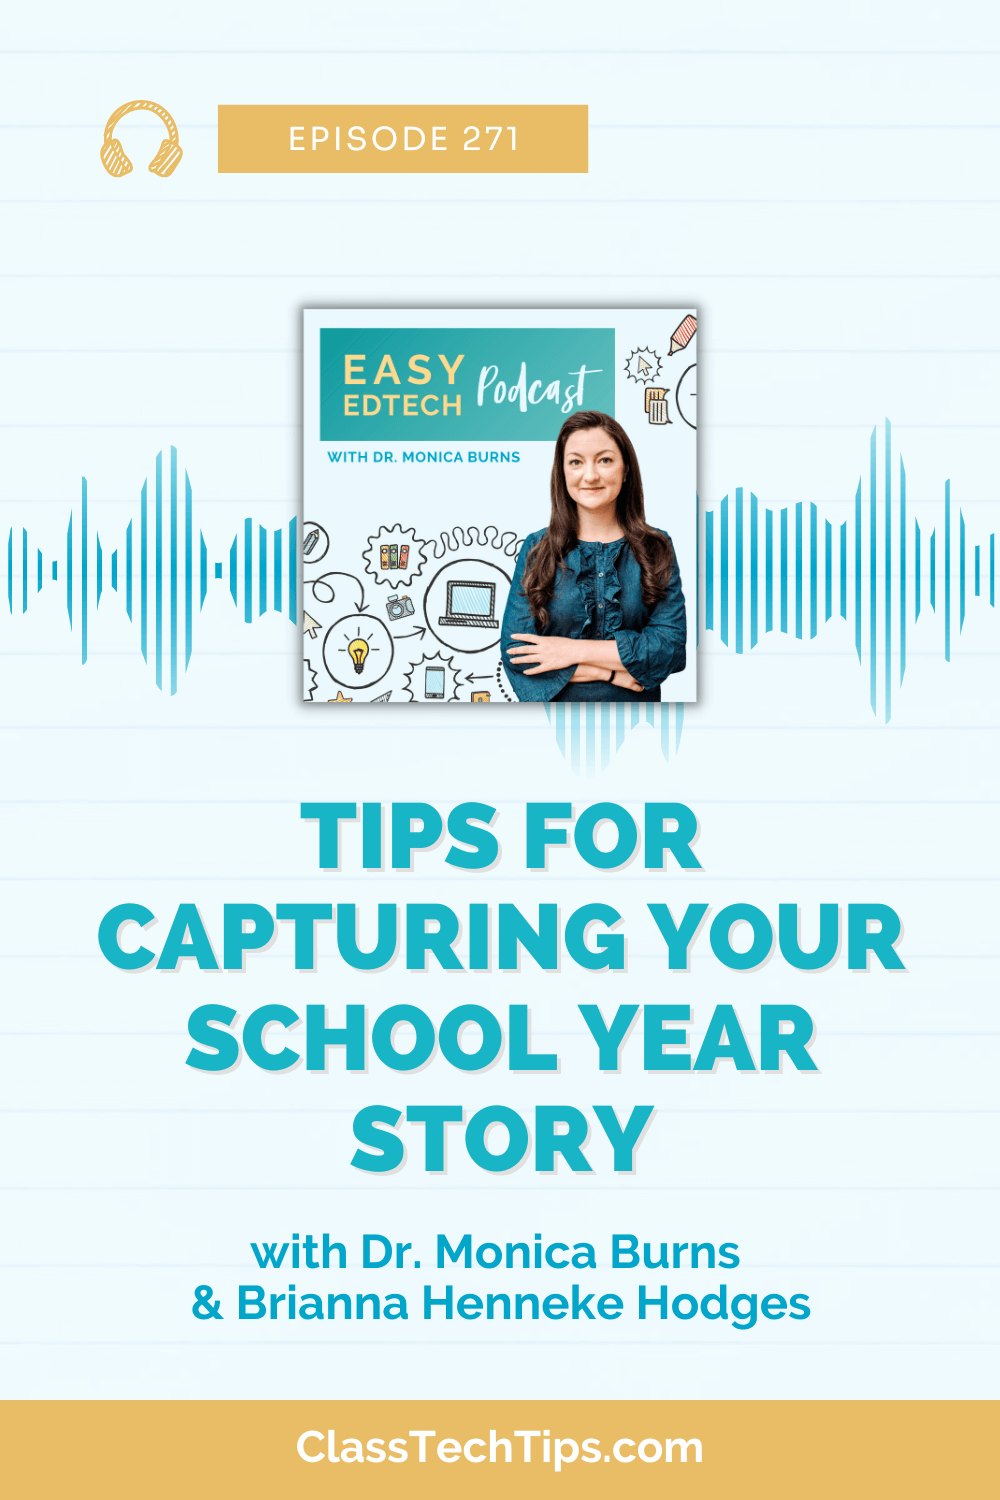 Episode 271 of the Easy EdTech Podcast with Dr. Monica Burns and Brianna Henneke Hodges focuses on tips for capturing your school year story. The image shows Dr. Monica Burns with podcast branding, emphasizing strategies for documenting and organizing digital artifacts throughout the school year.